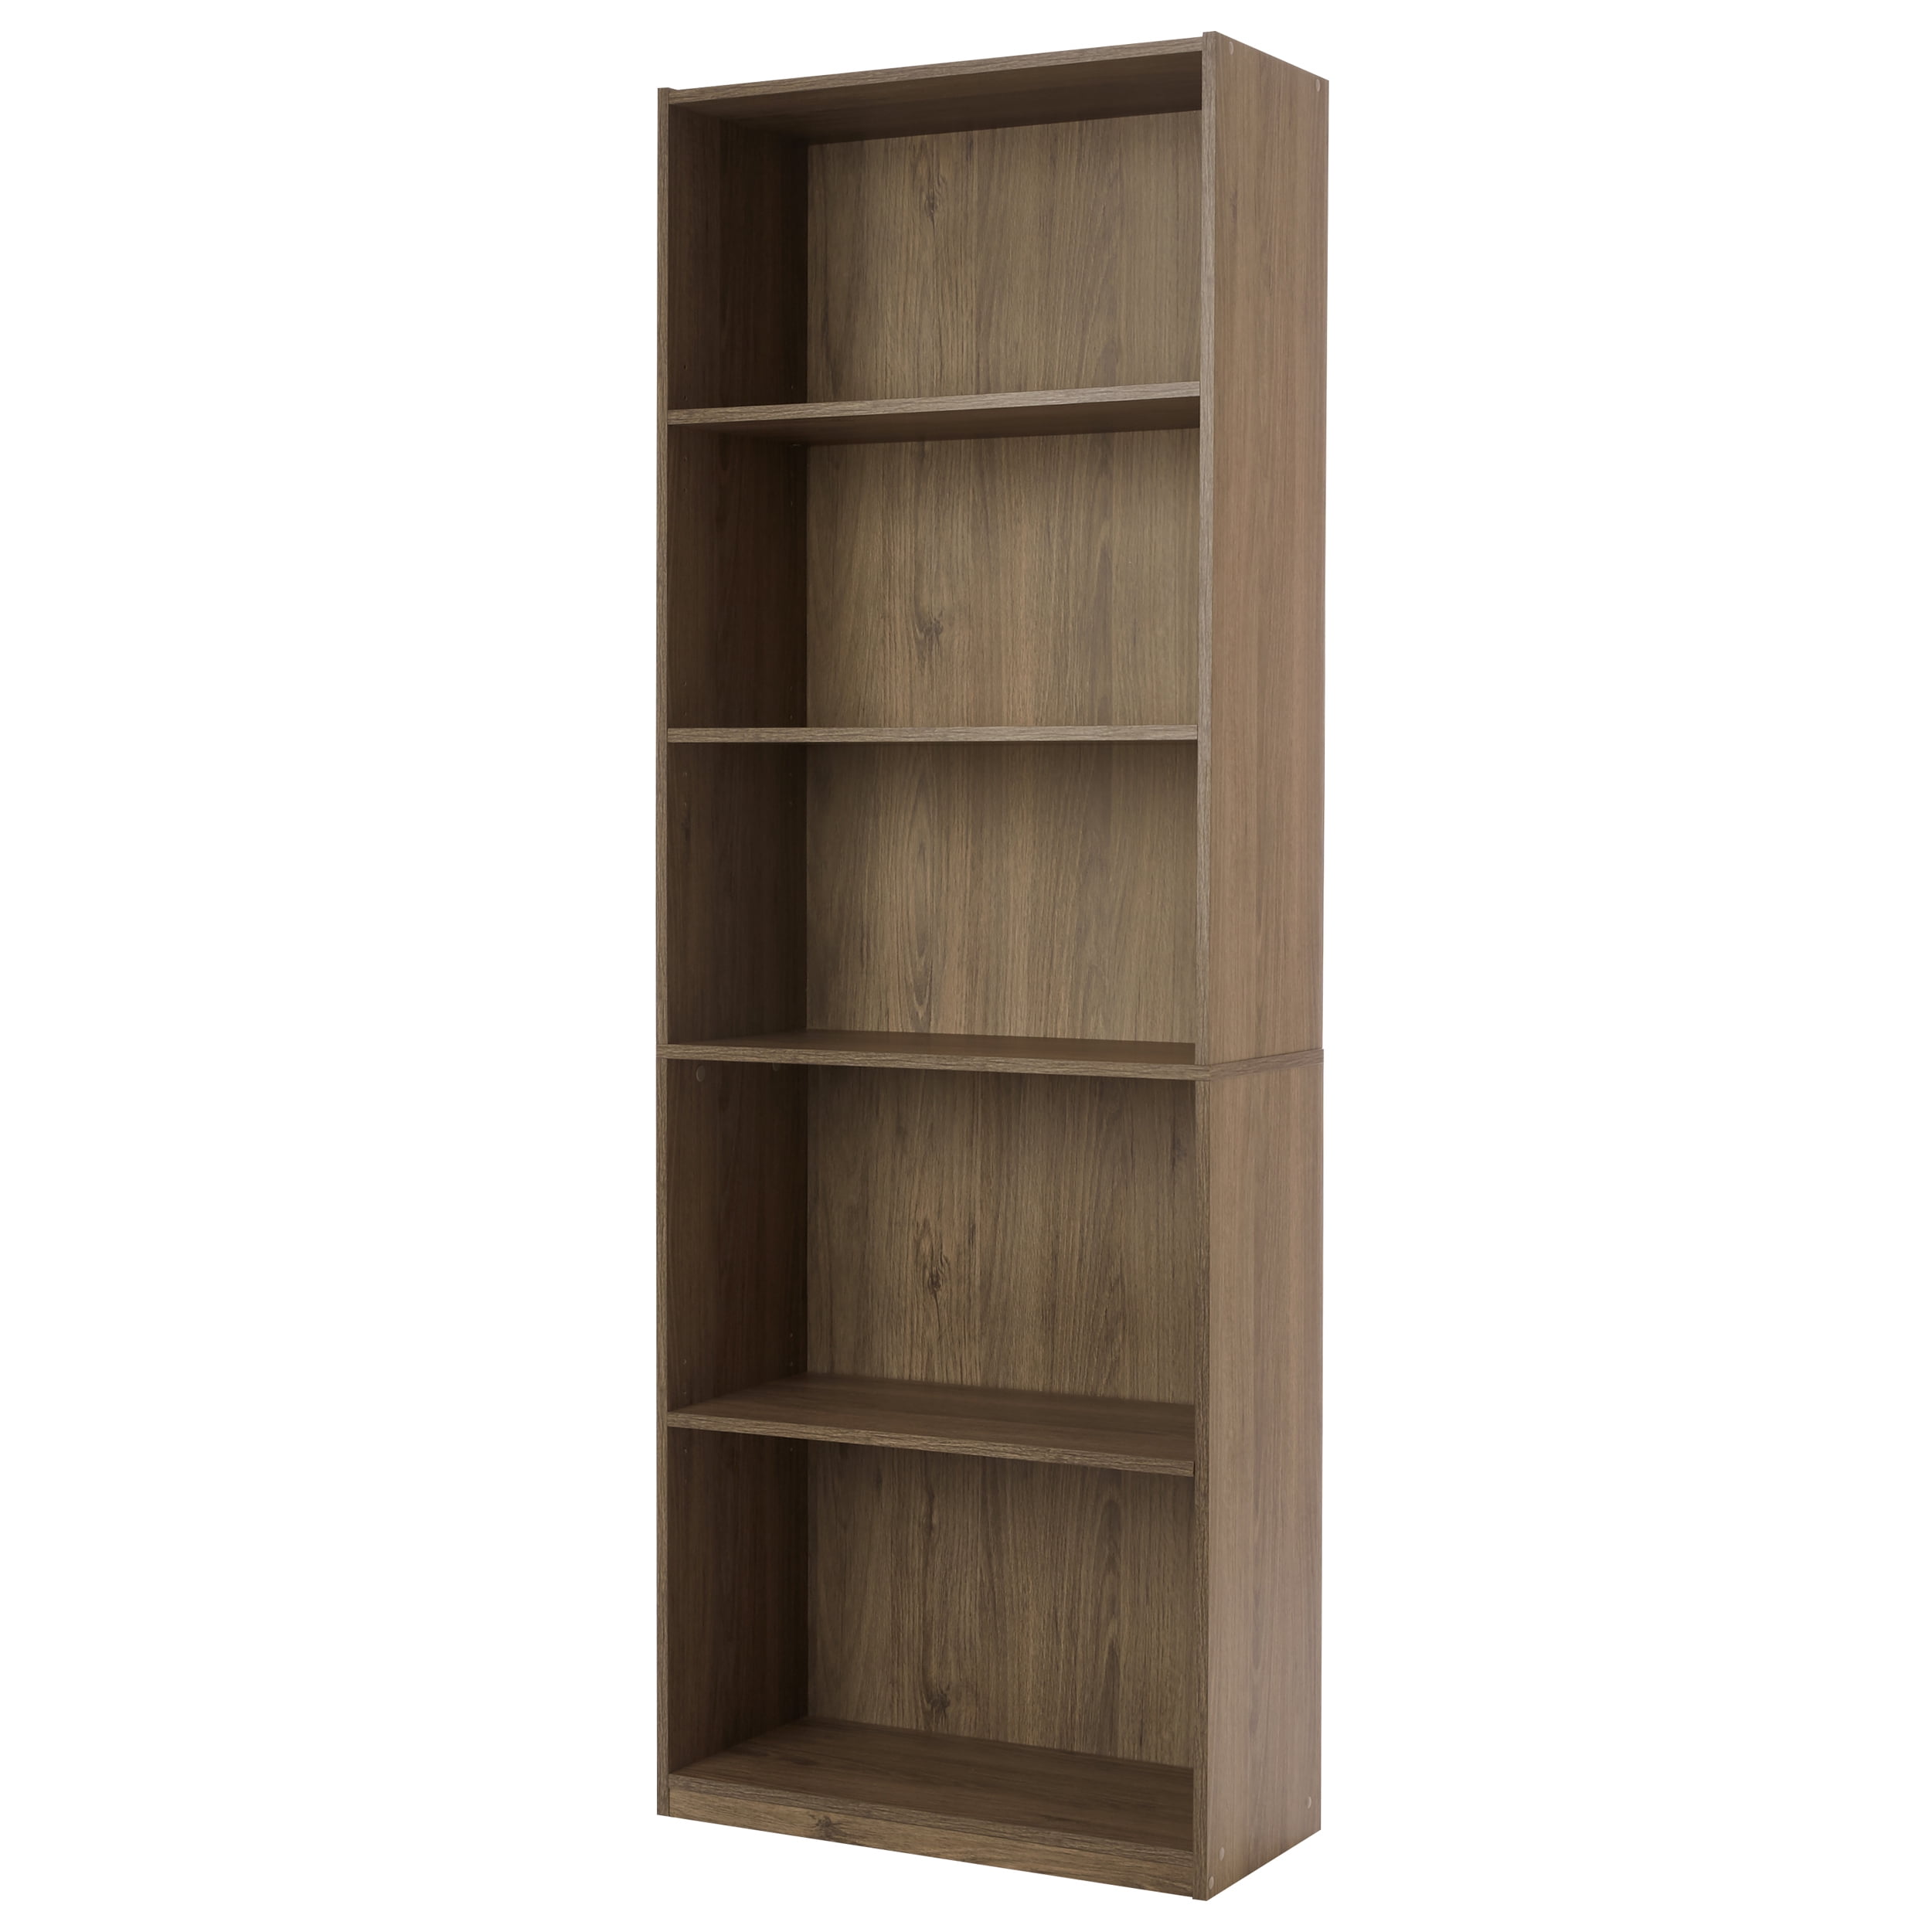 Mainstays 71 5 Shelf Bookcase With, How To Set Mainstays 5 Shelf Bookcase